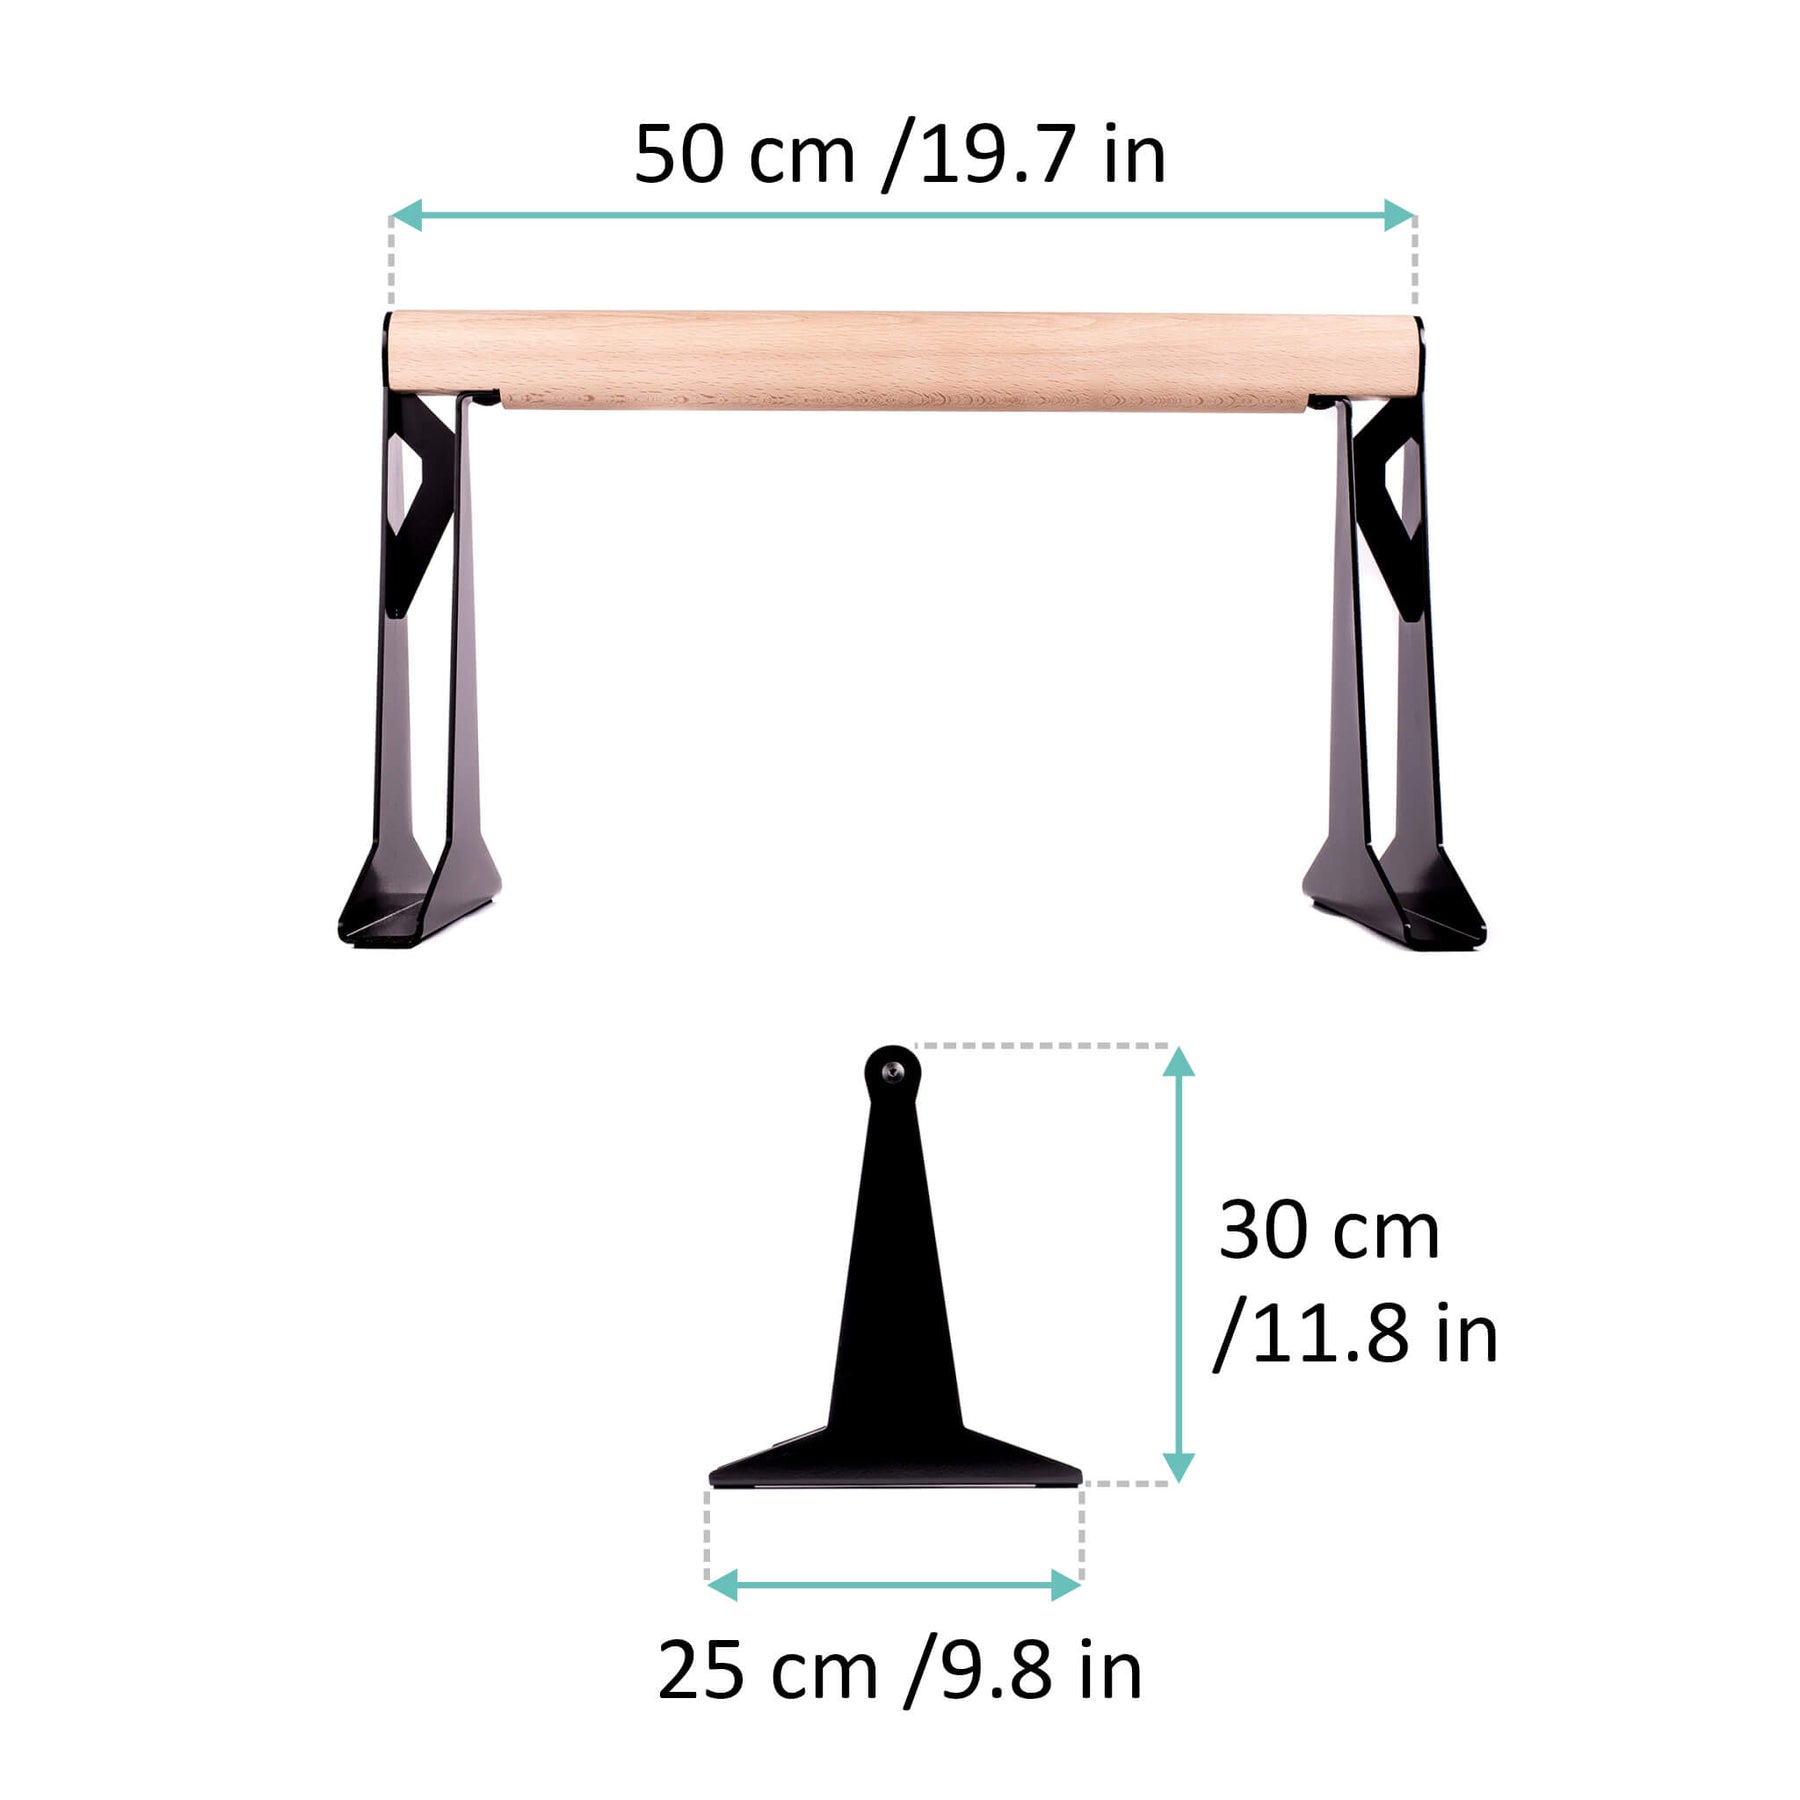 High Quality Wooden Parallettes With Ergonomic Wooden Handle - Low Or Medium Version